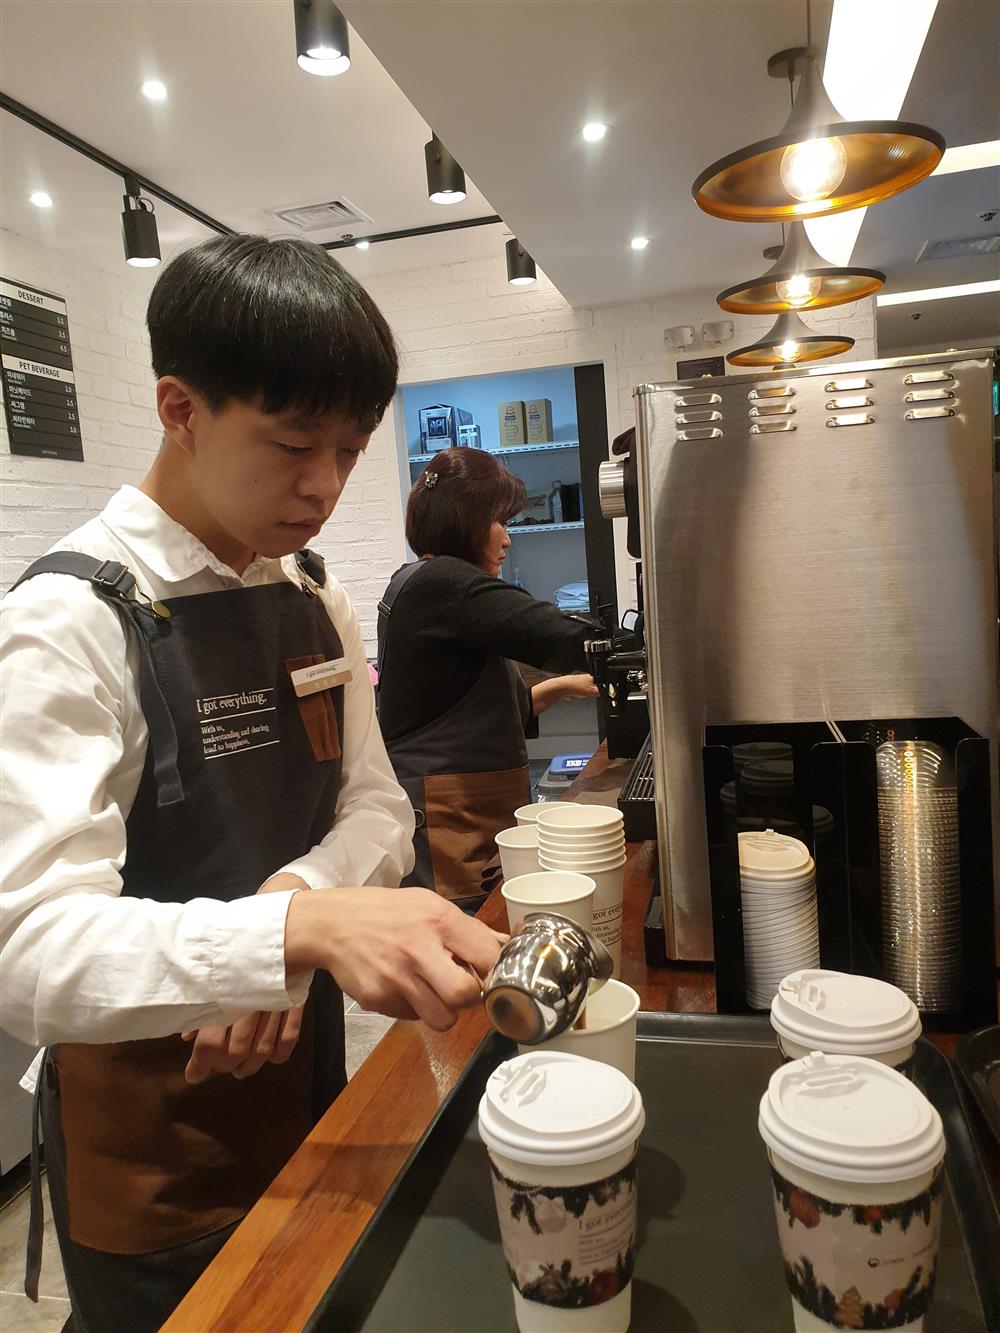 A young man wearing an apron stands behind a coffee machine in a coffee shop. He is pouring milk into a takeaway coffee cup. A woman in an apron is making coffee at a second machine in the background.